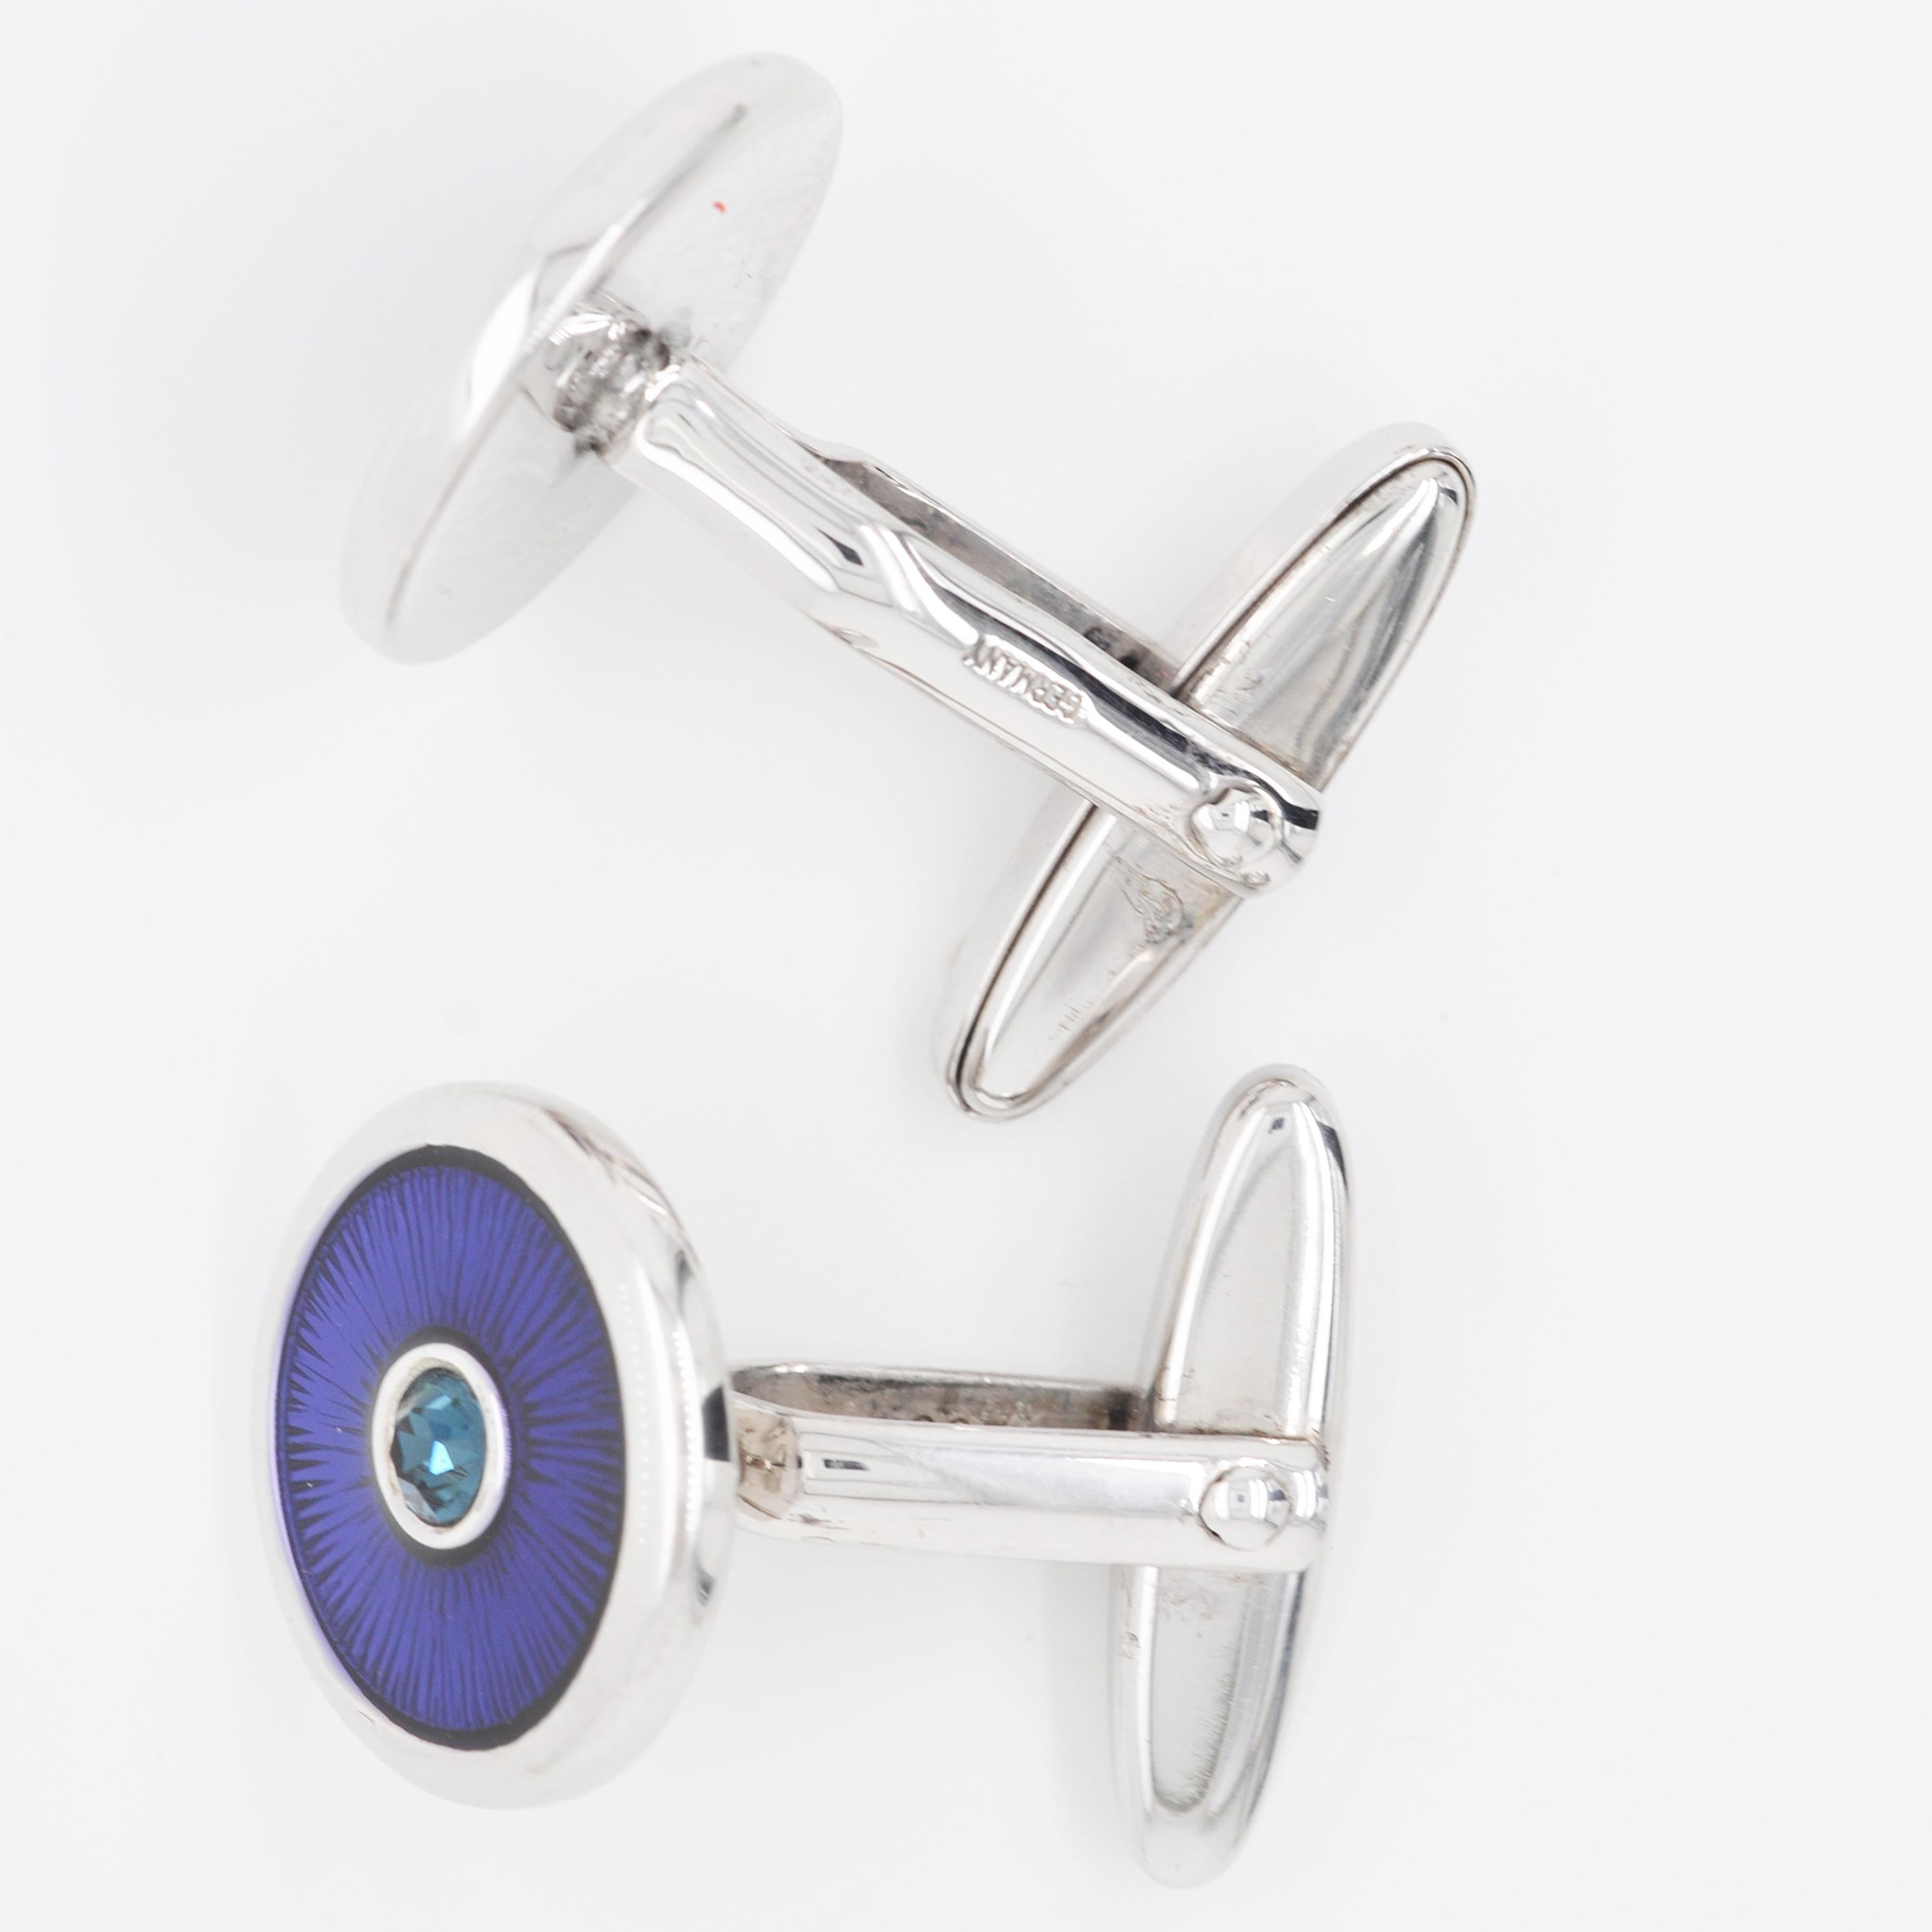 Made from Sterling Silver, these cufflinks are contemporary in style with a dash of blue colour. These round shaped cufflinks feature stunning Peacock Blue guilloche enamel with radiant patterns under the enamel, enveloped inside Sterling Silver